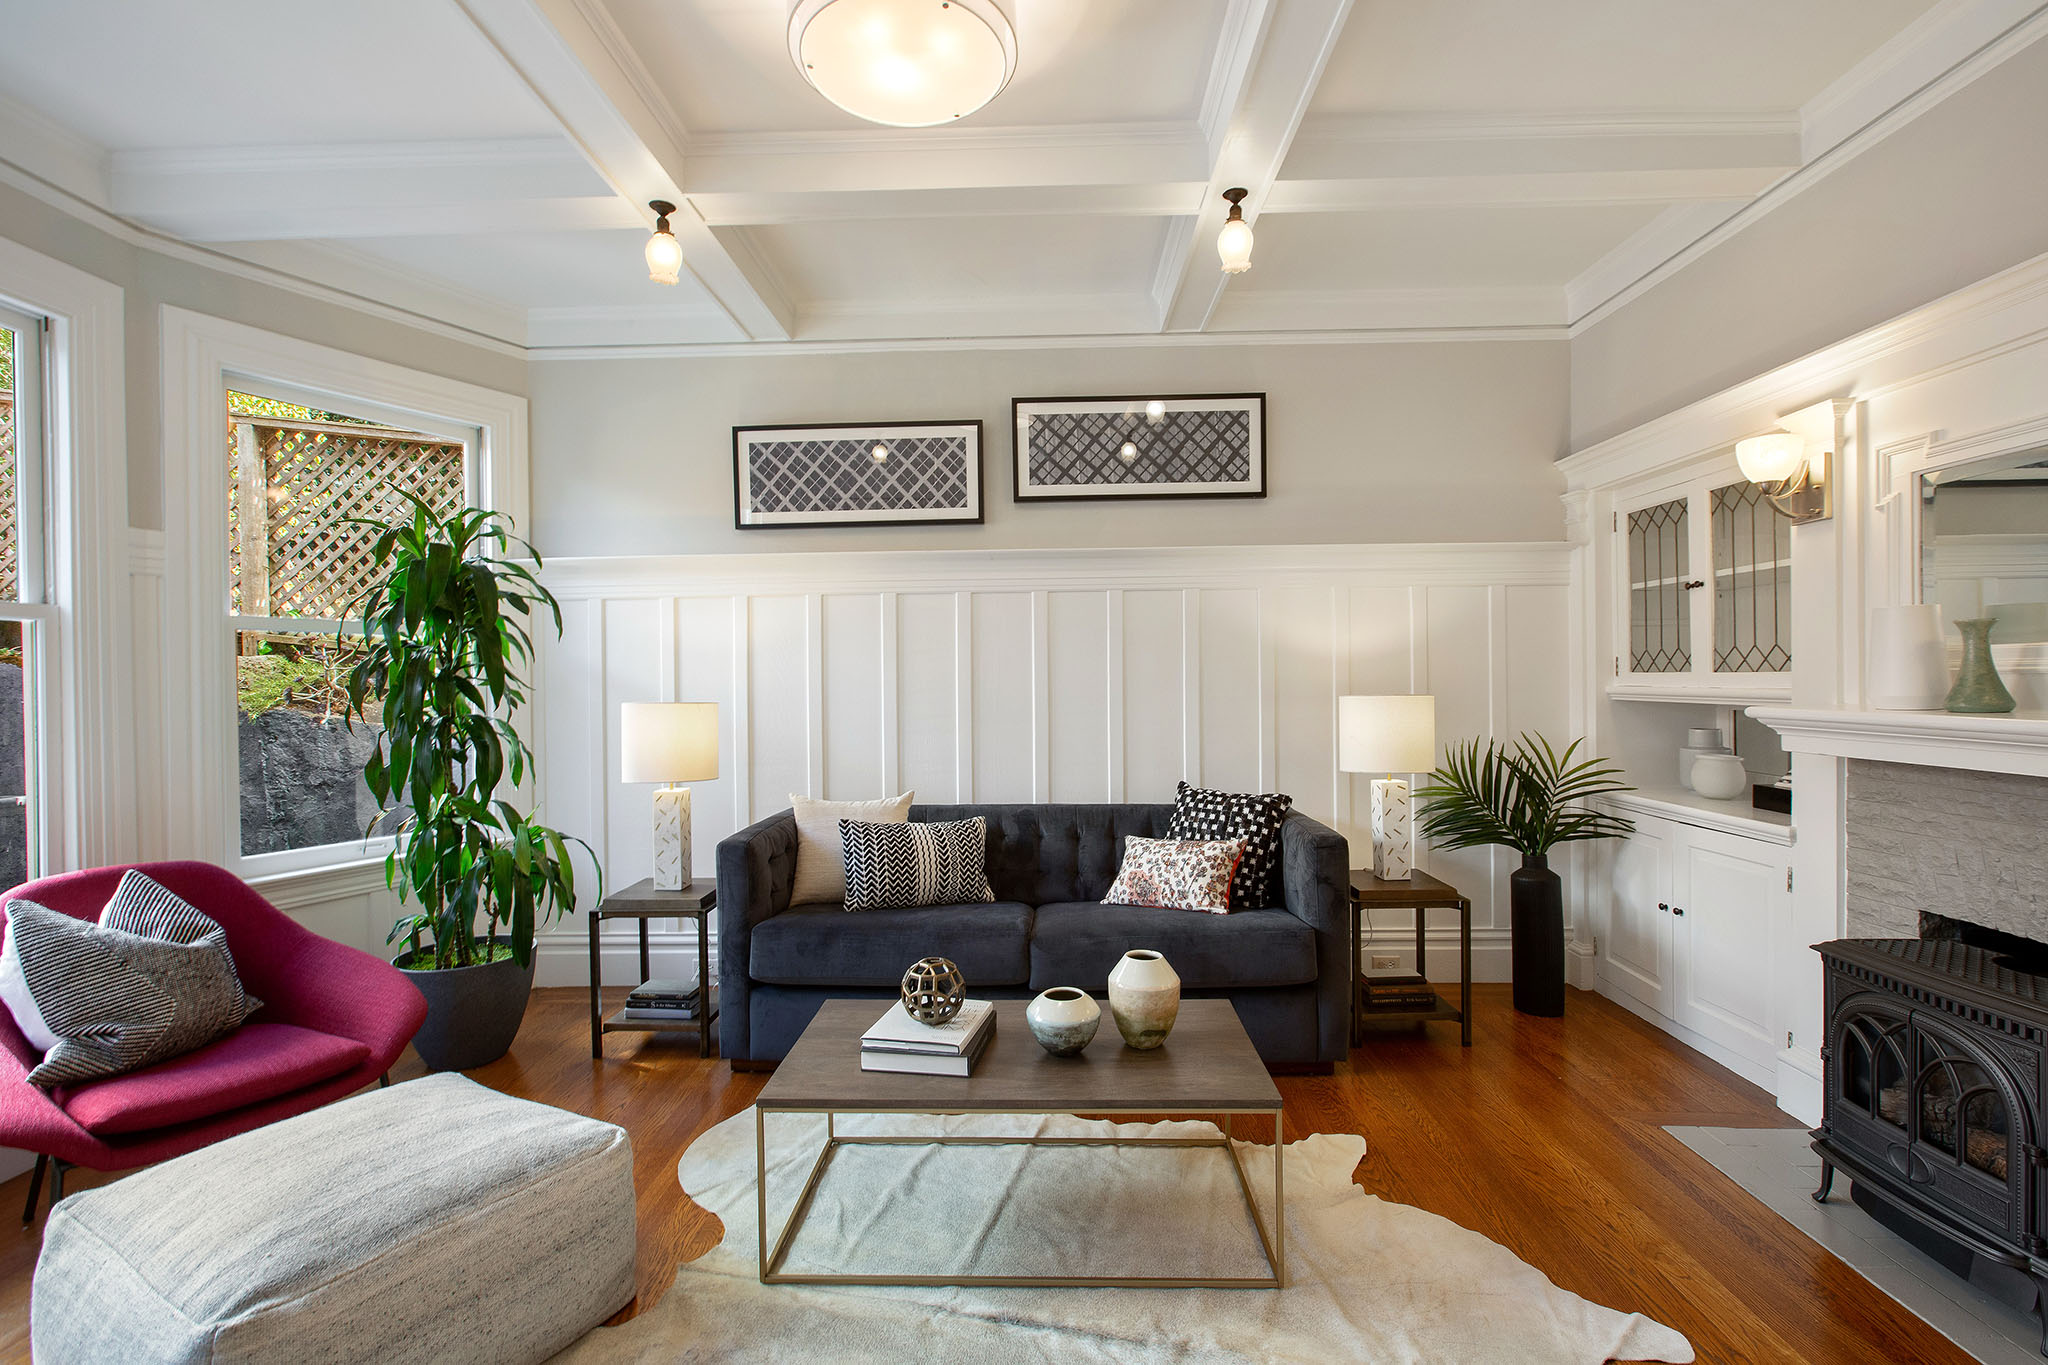 Property Photo: View of the living room, showing boxed ceilings, wood floors and white wainscoting